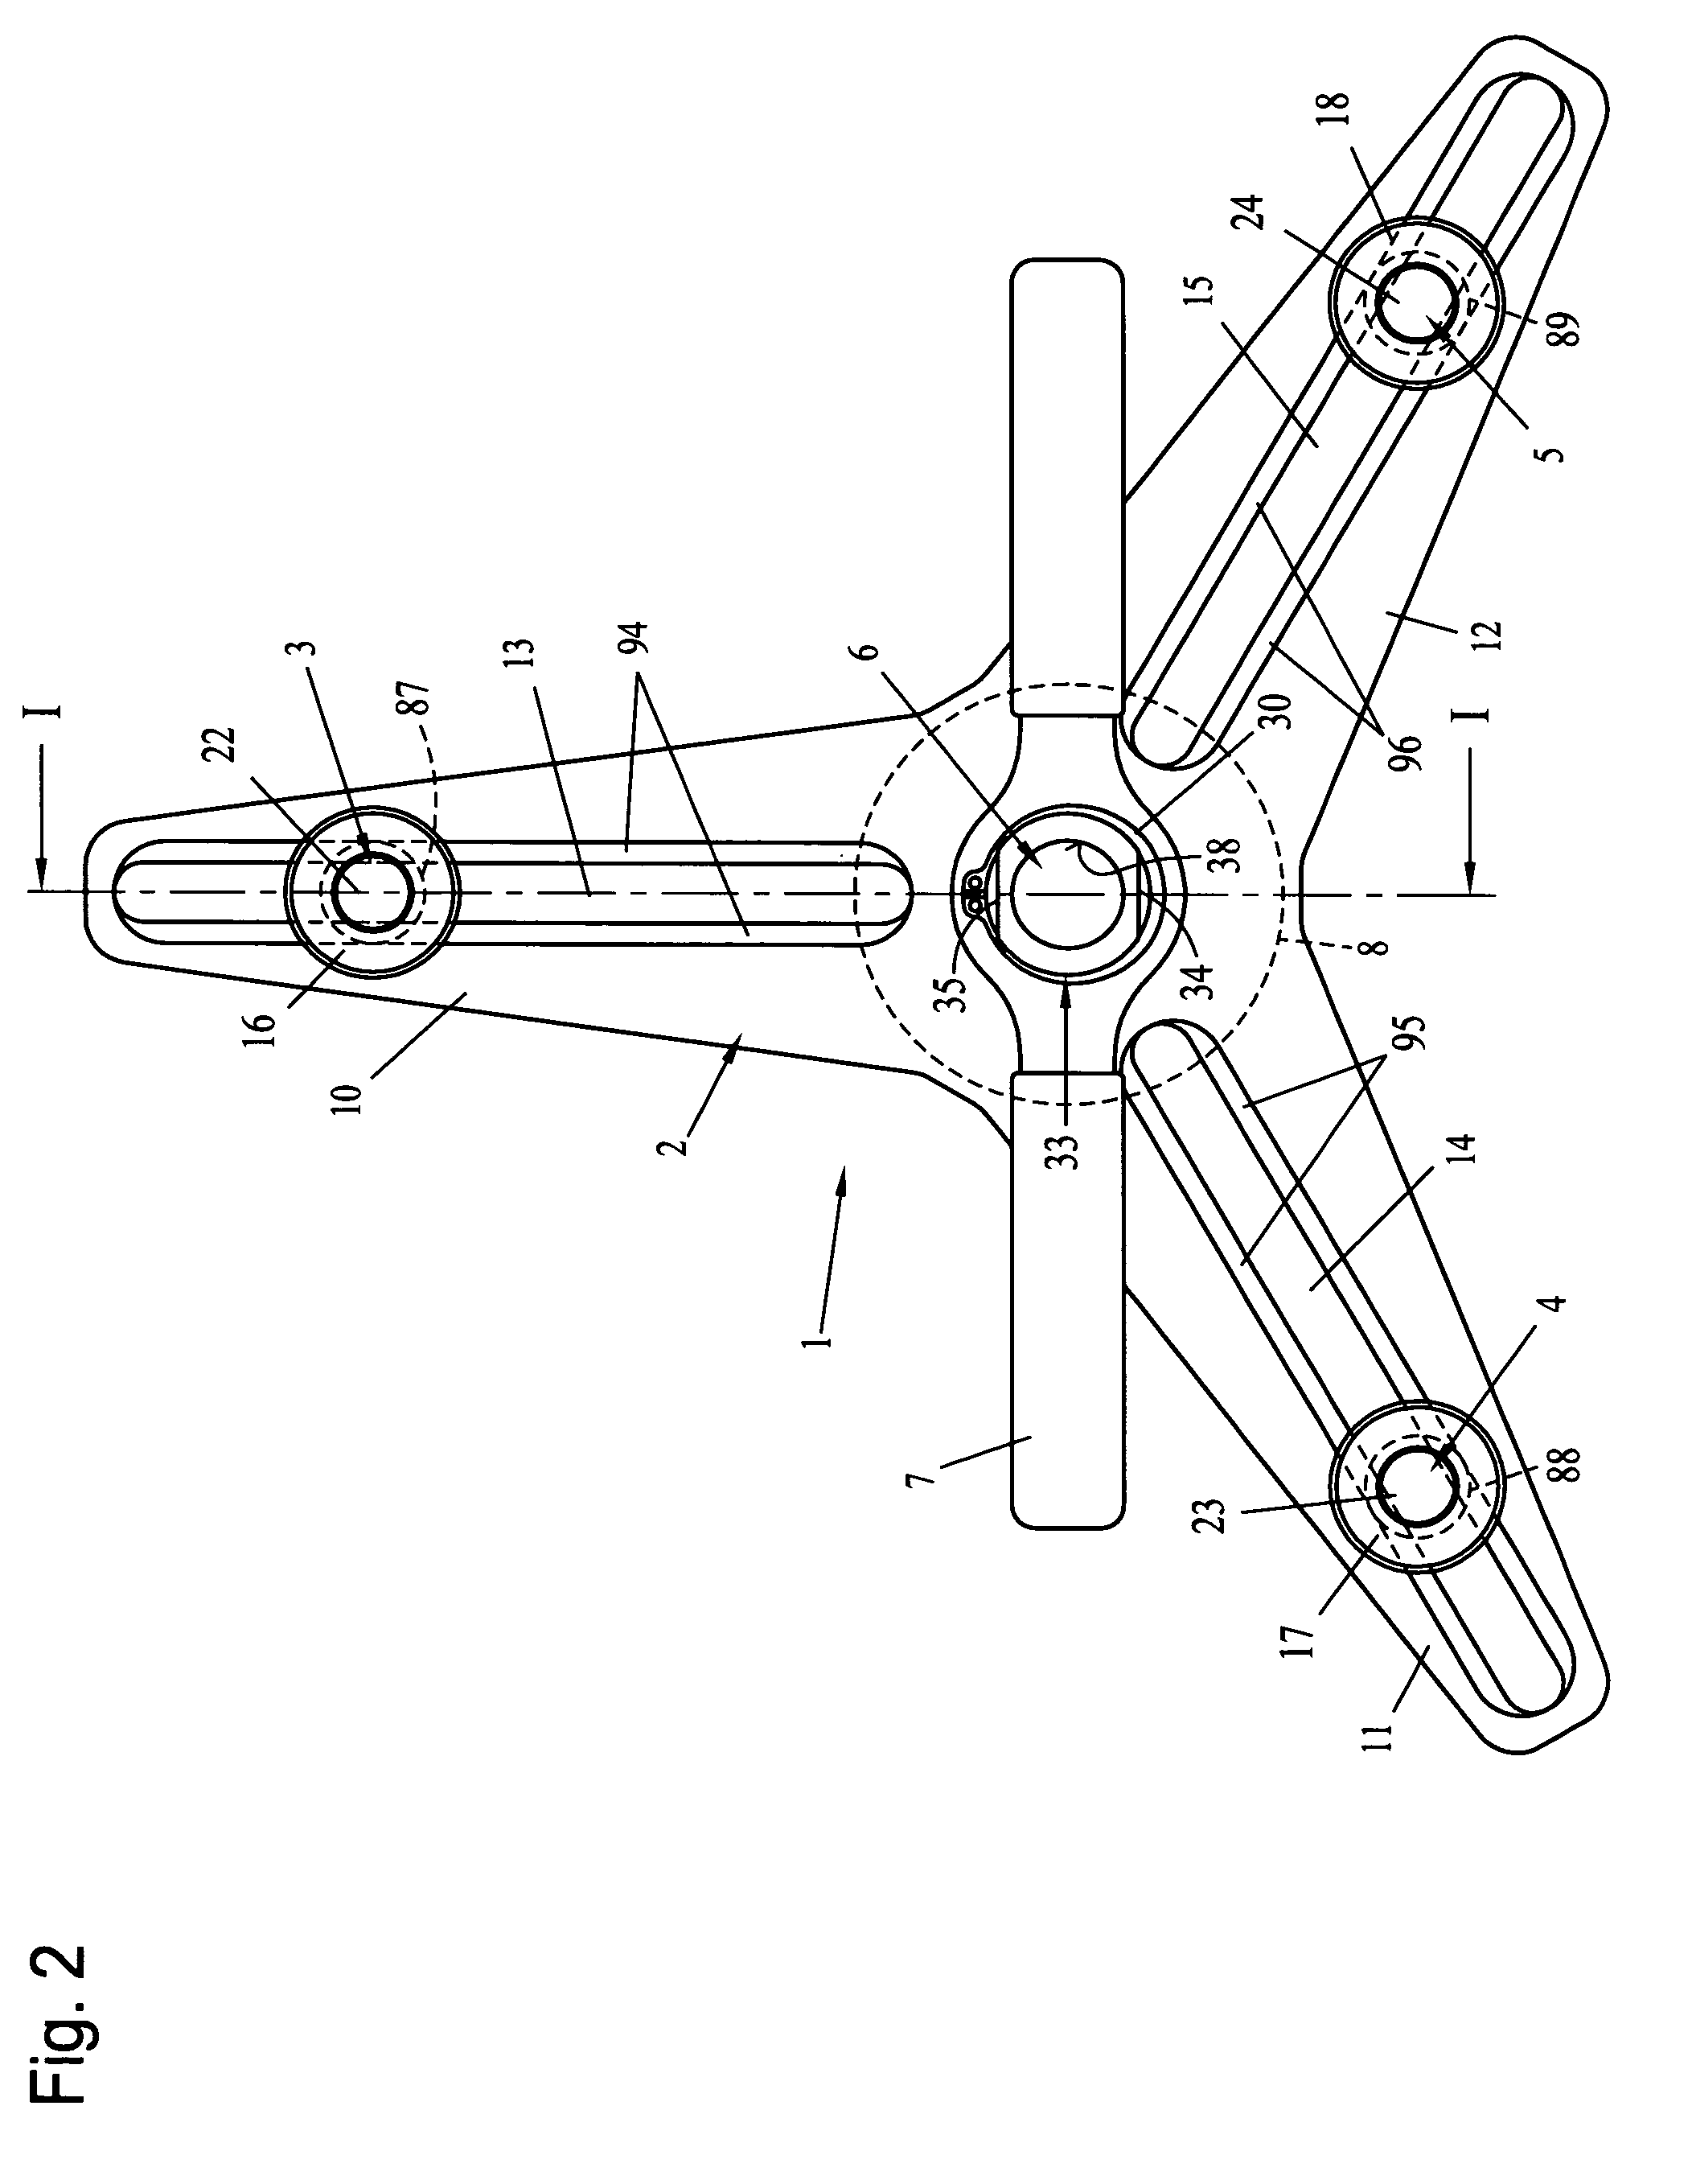 Device for the assembly of a motor vehicle clutch